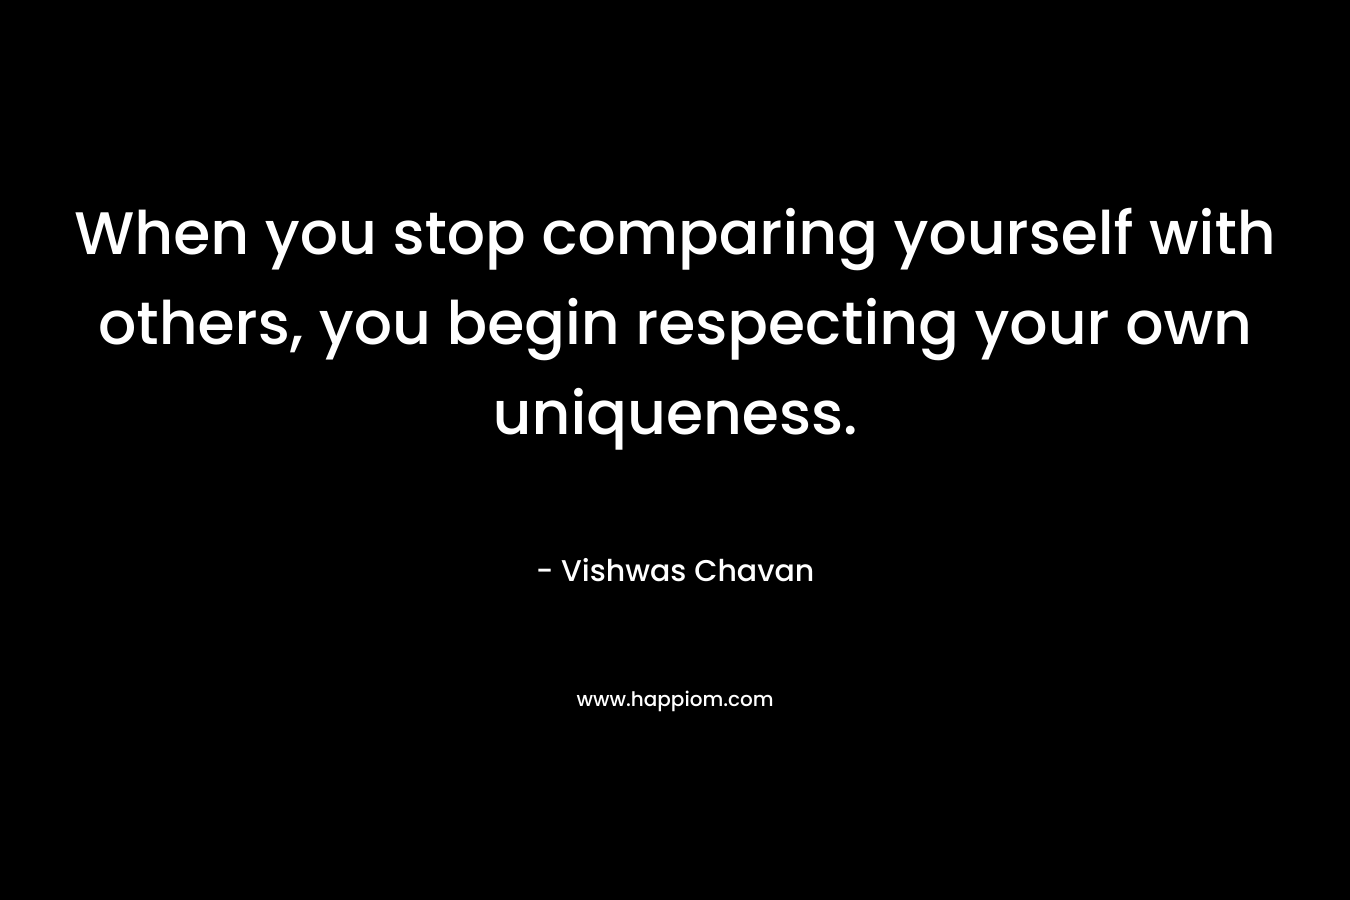 When you stop comparing yourself with others, you begin respecting your own uniqueness.